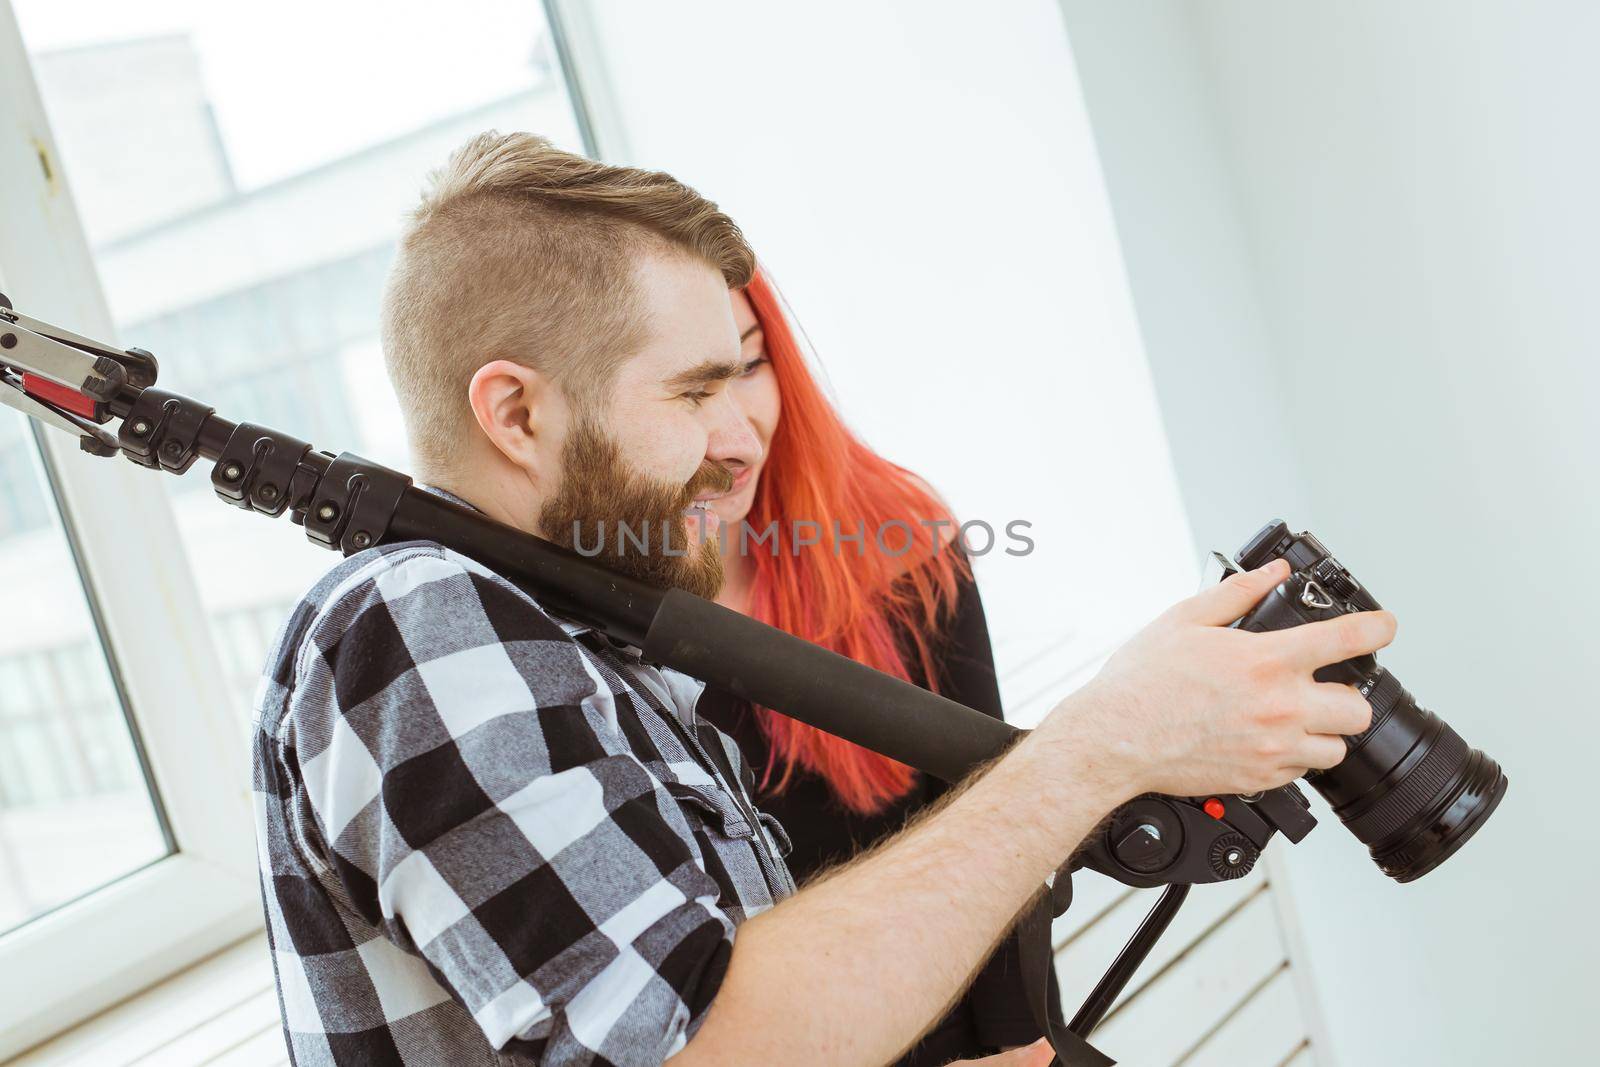 production, shooting advertising and content for social networks - Operator working with a camera on his shoulder and shows the girl footage.